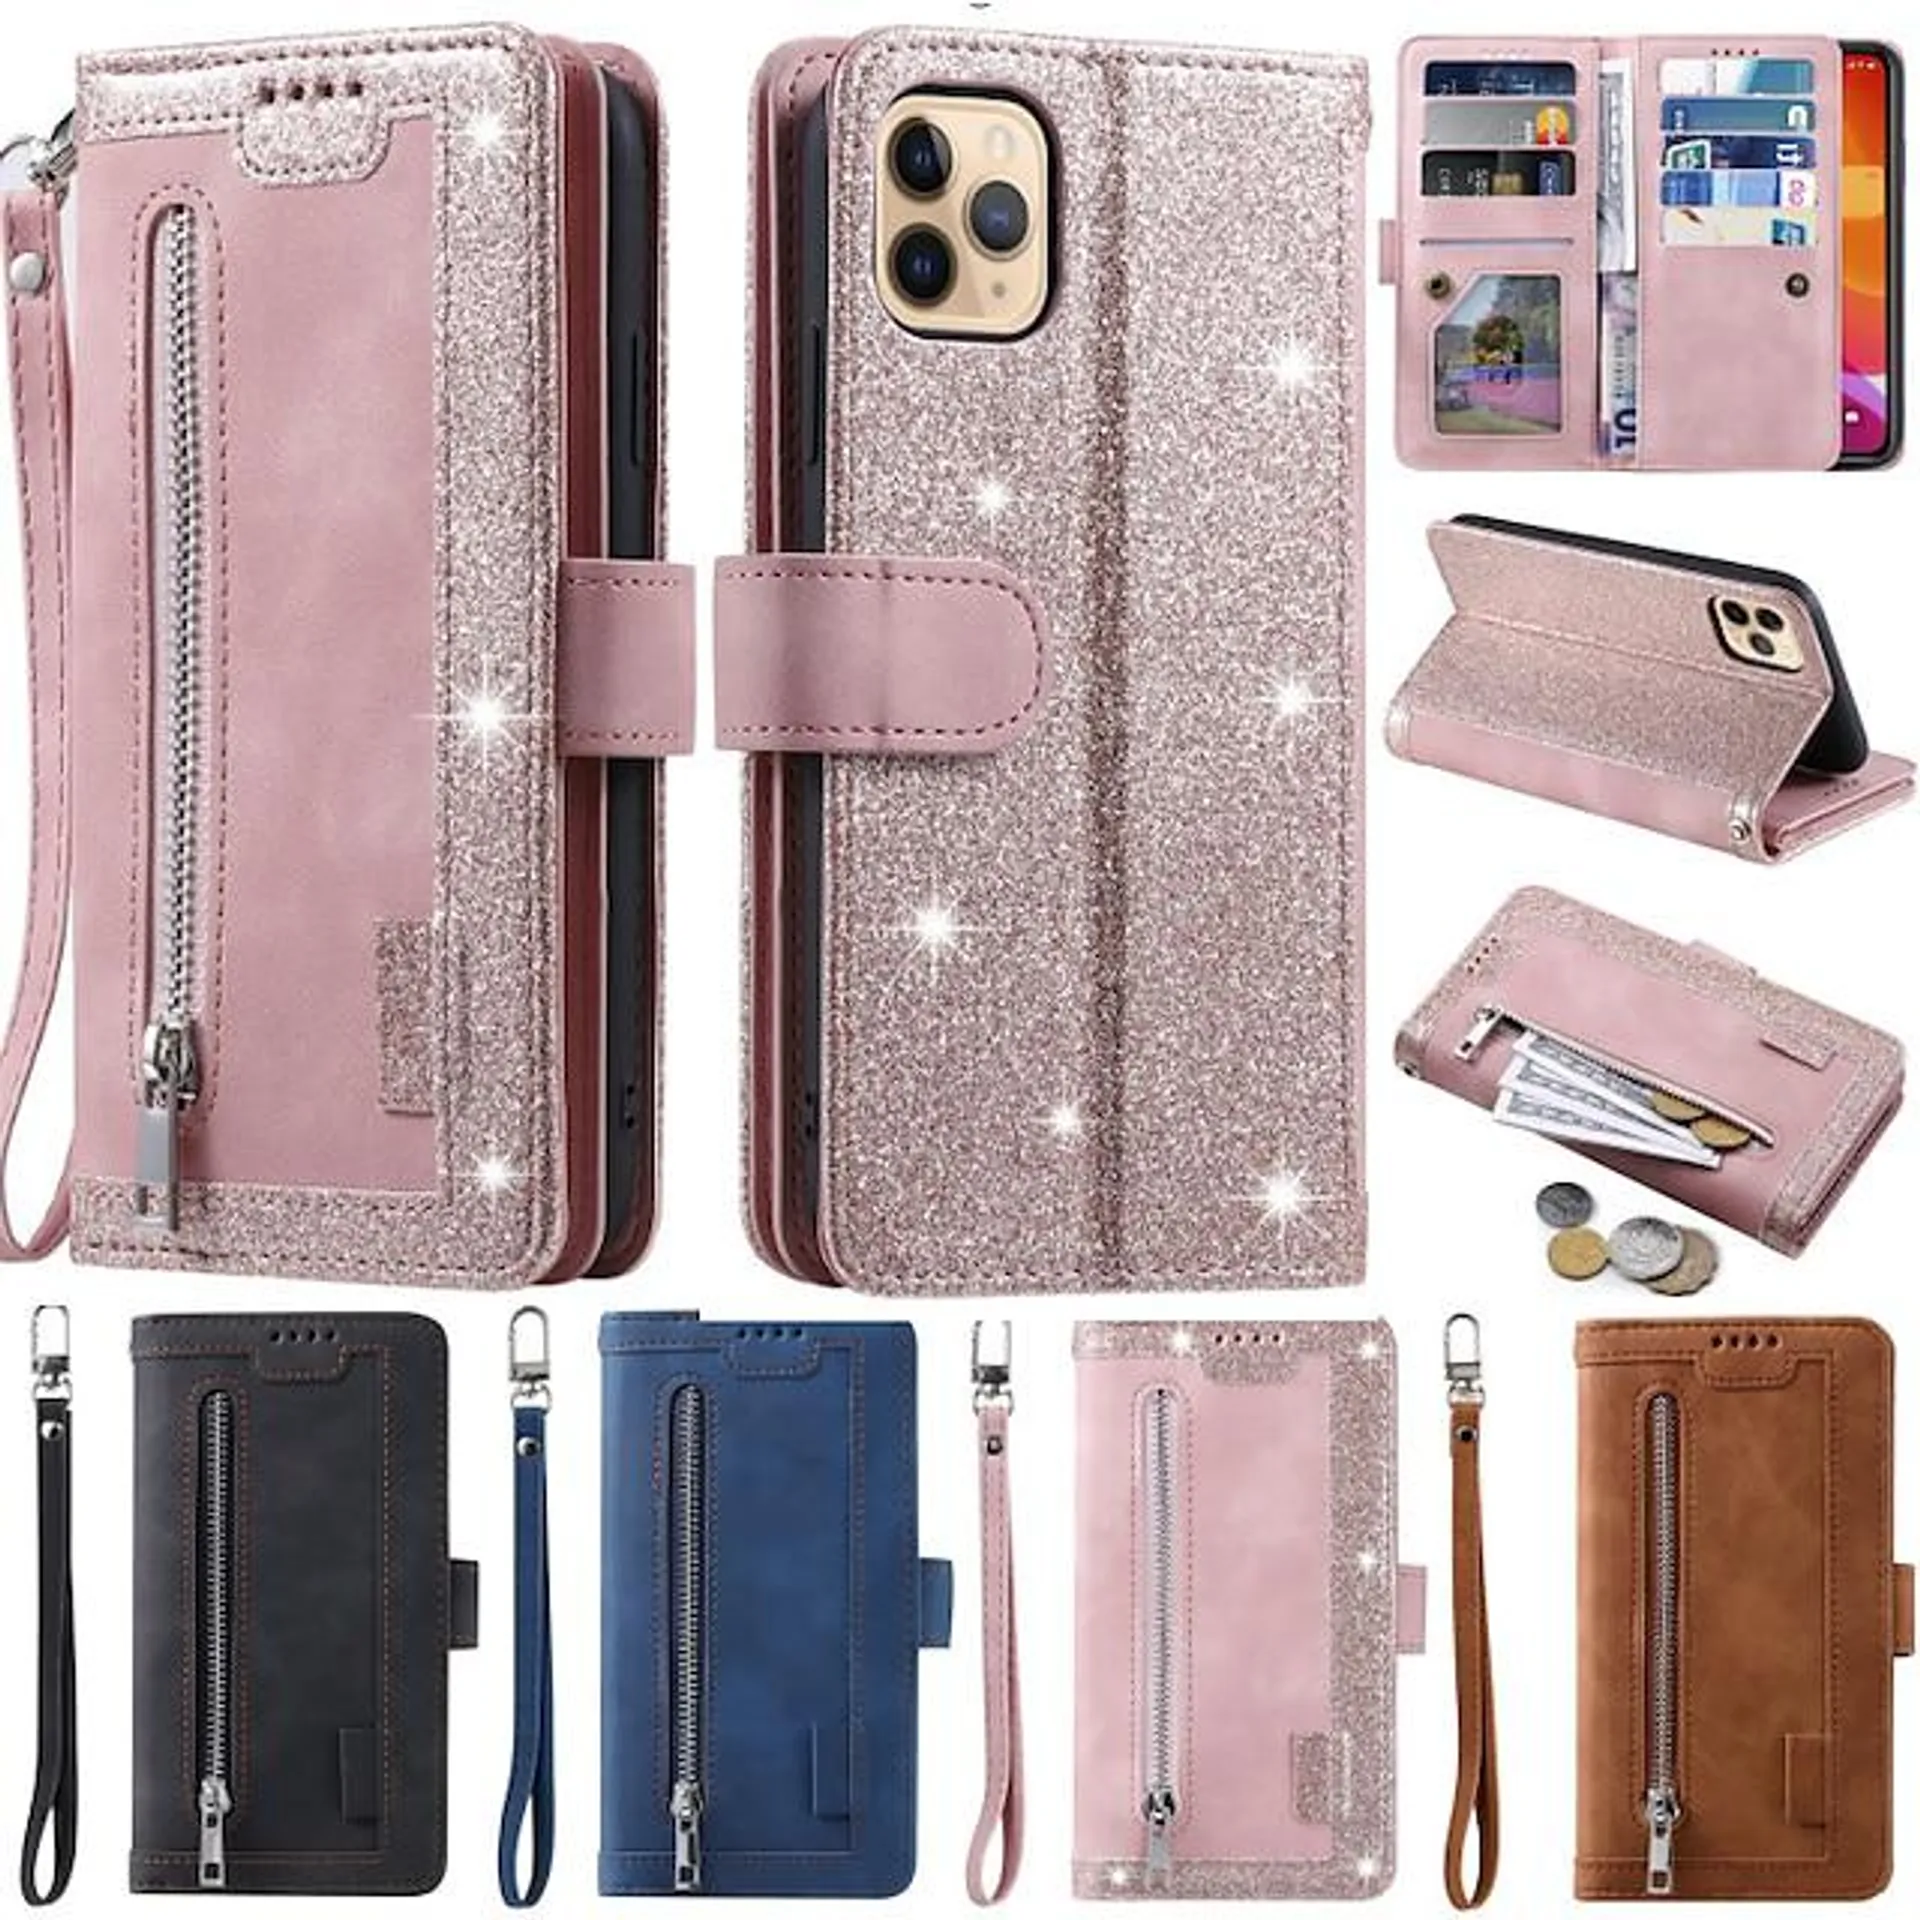 Zipper Wallet Case For Samsung GalaxyS23 S22 S21 S20 Plus Ultra S10 Plus E S9 S8 Plus A72 A52 A42 A73 A53 A33 A71 A51 A41 Shockproof Solid Color PU Leather Luxury Card Slot Stand Full Body Case